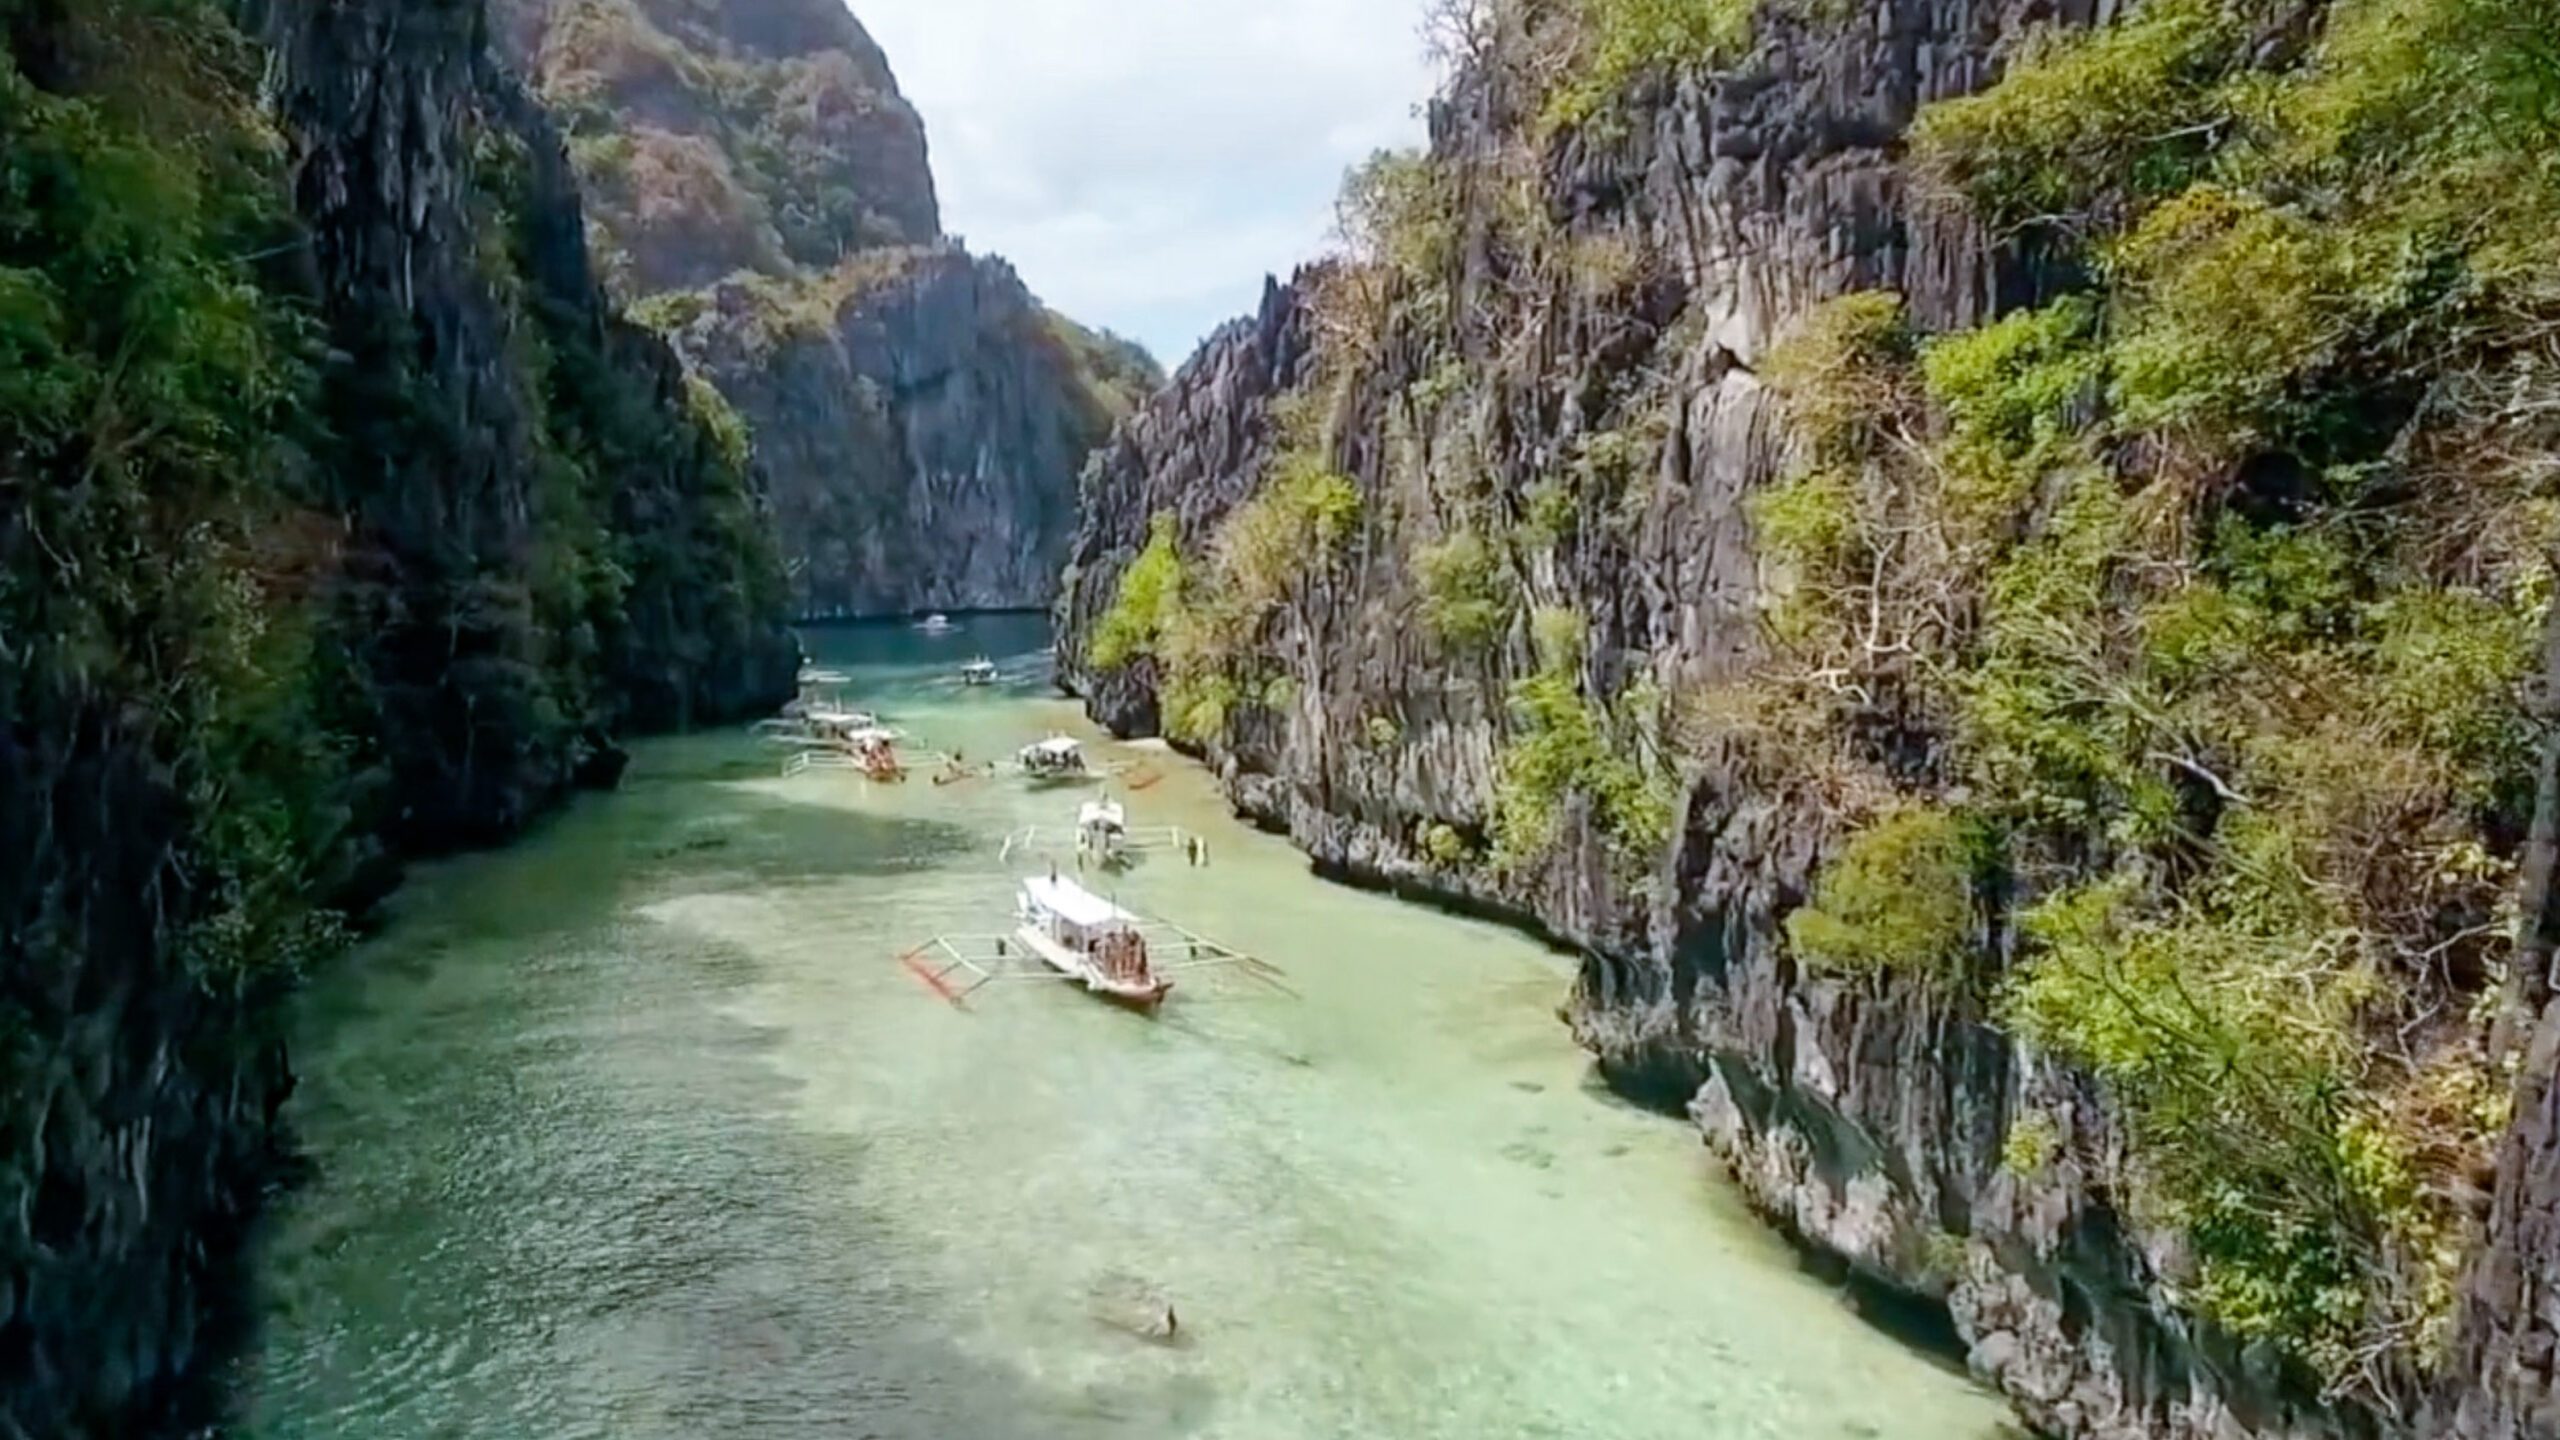 WATCH: Unofficial PH tourism ad makes waves online